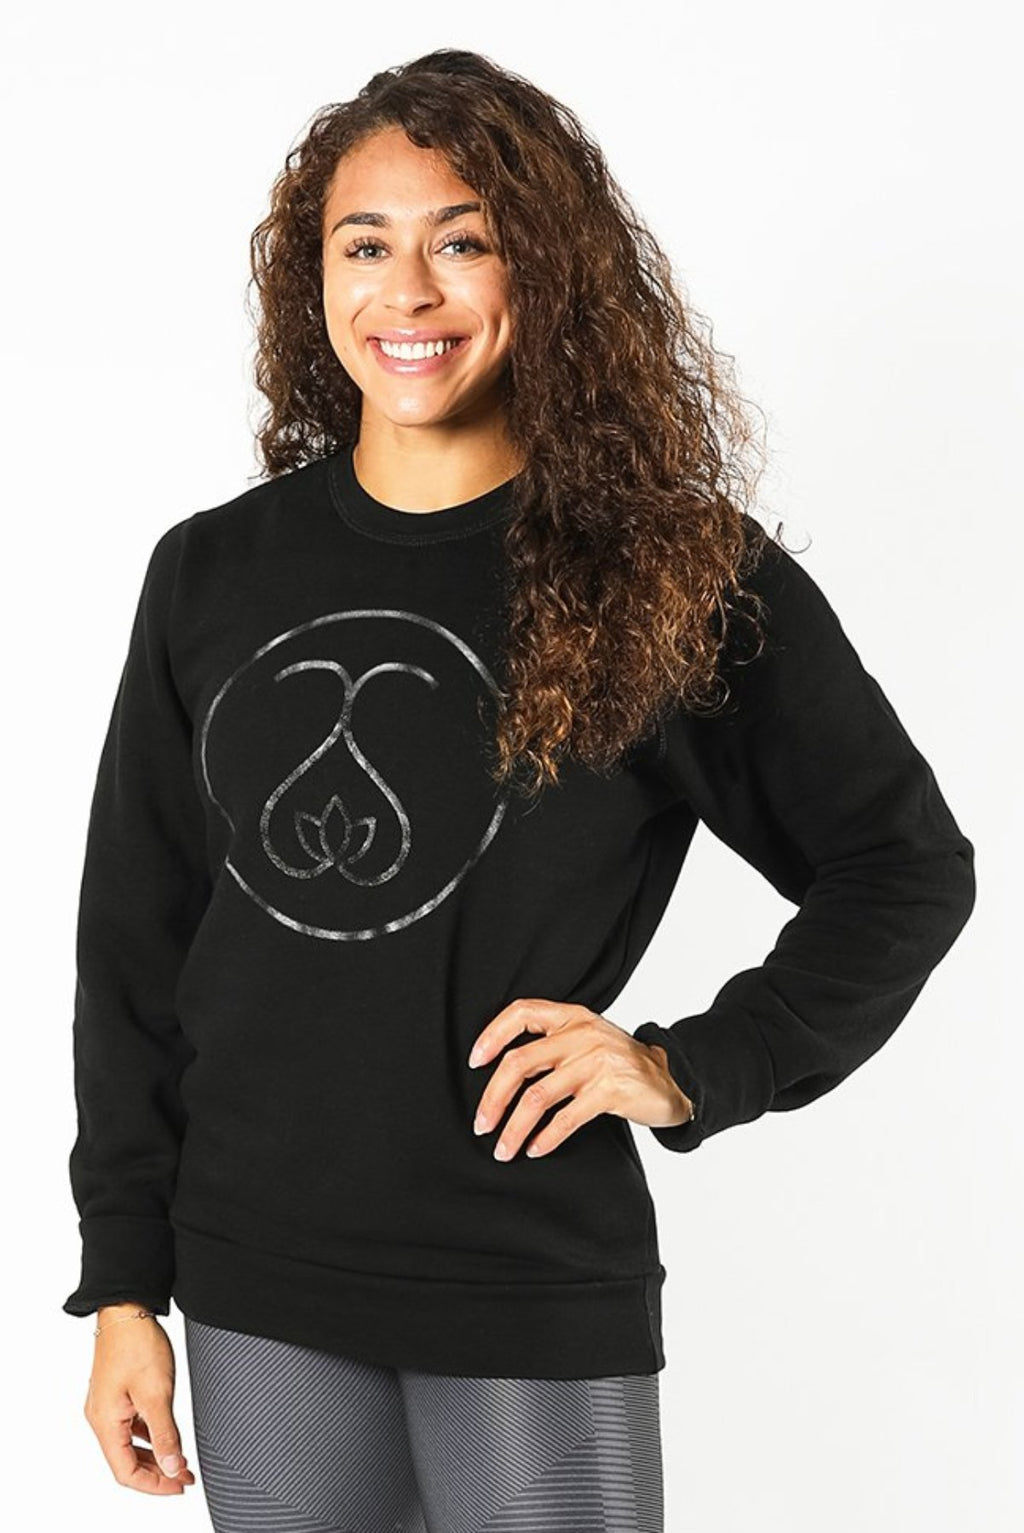 Sweat Society - Ethical Active Wear